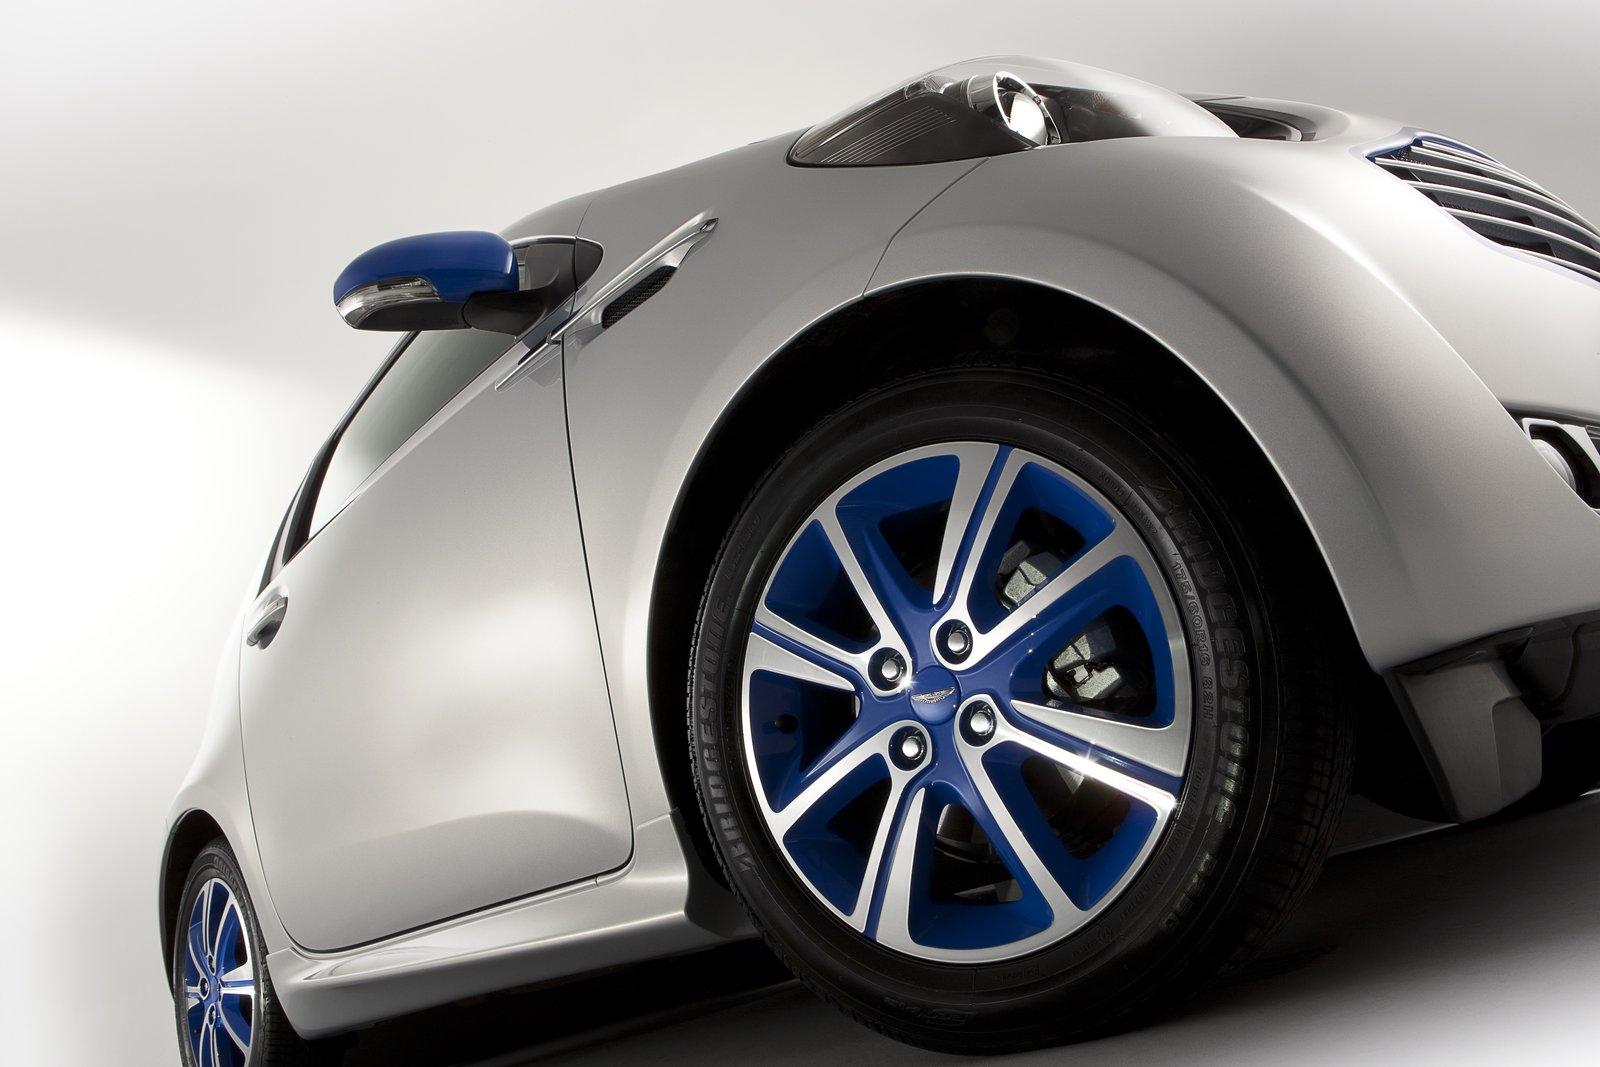 Aston Martin Cygnet and Colette Limited Edition